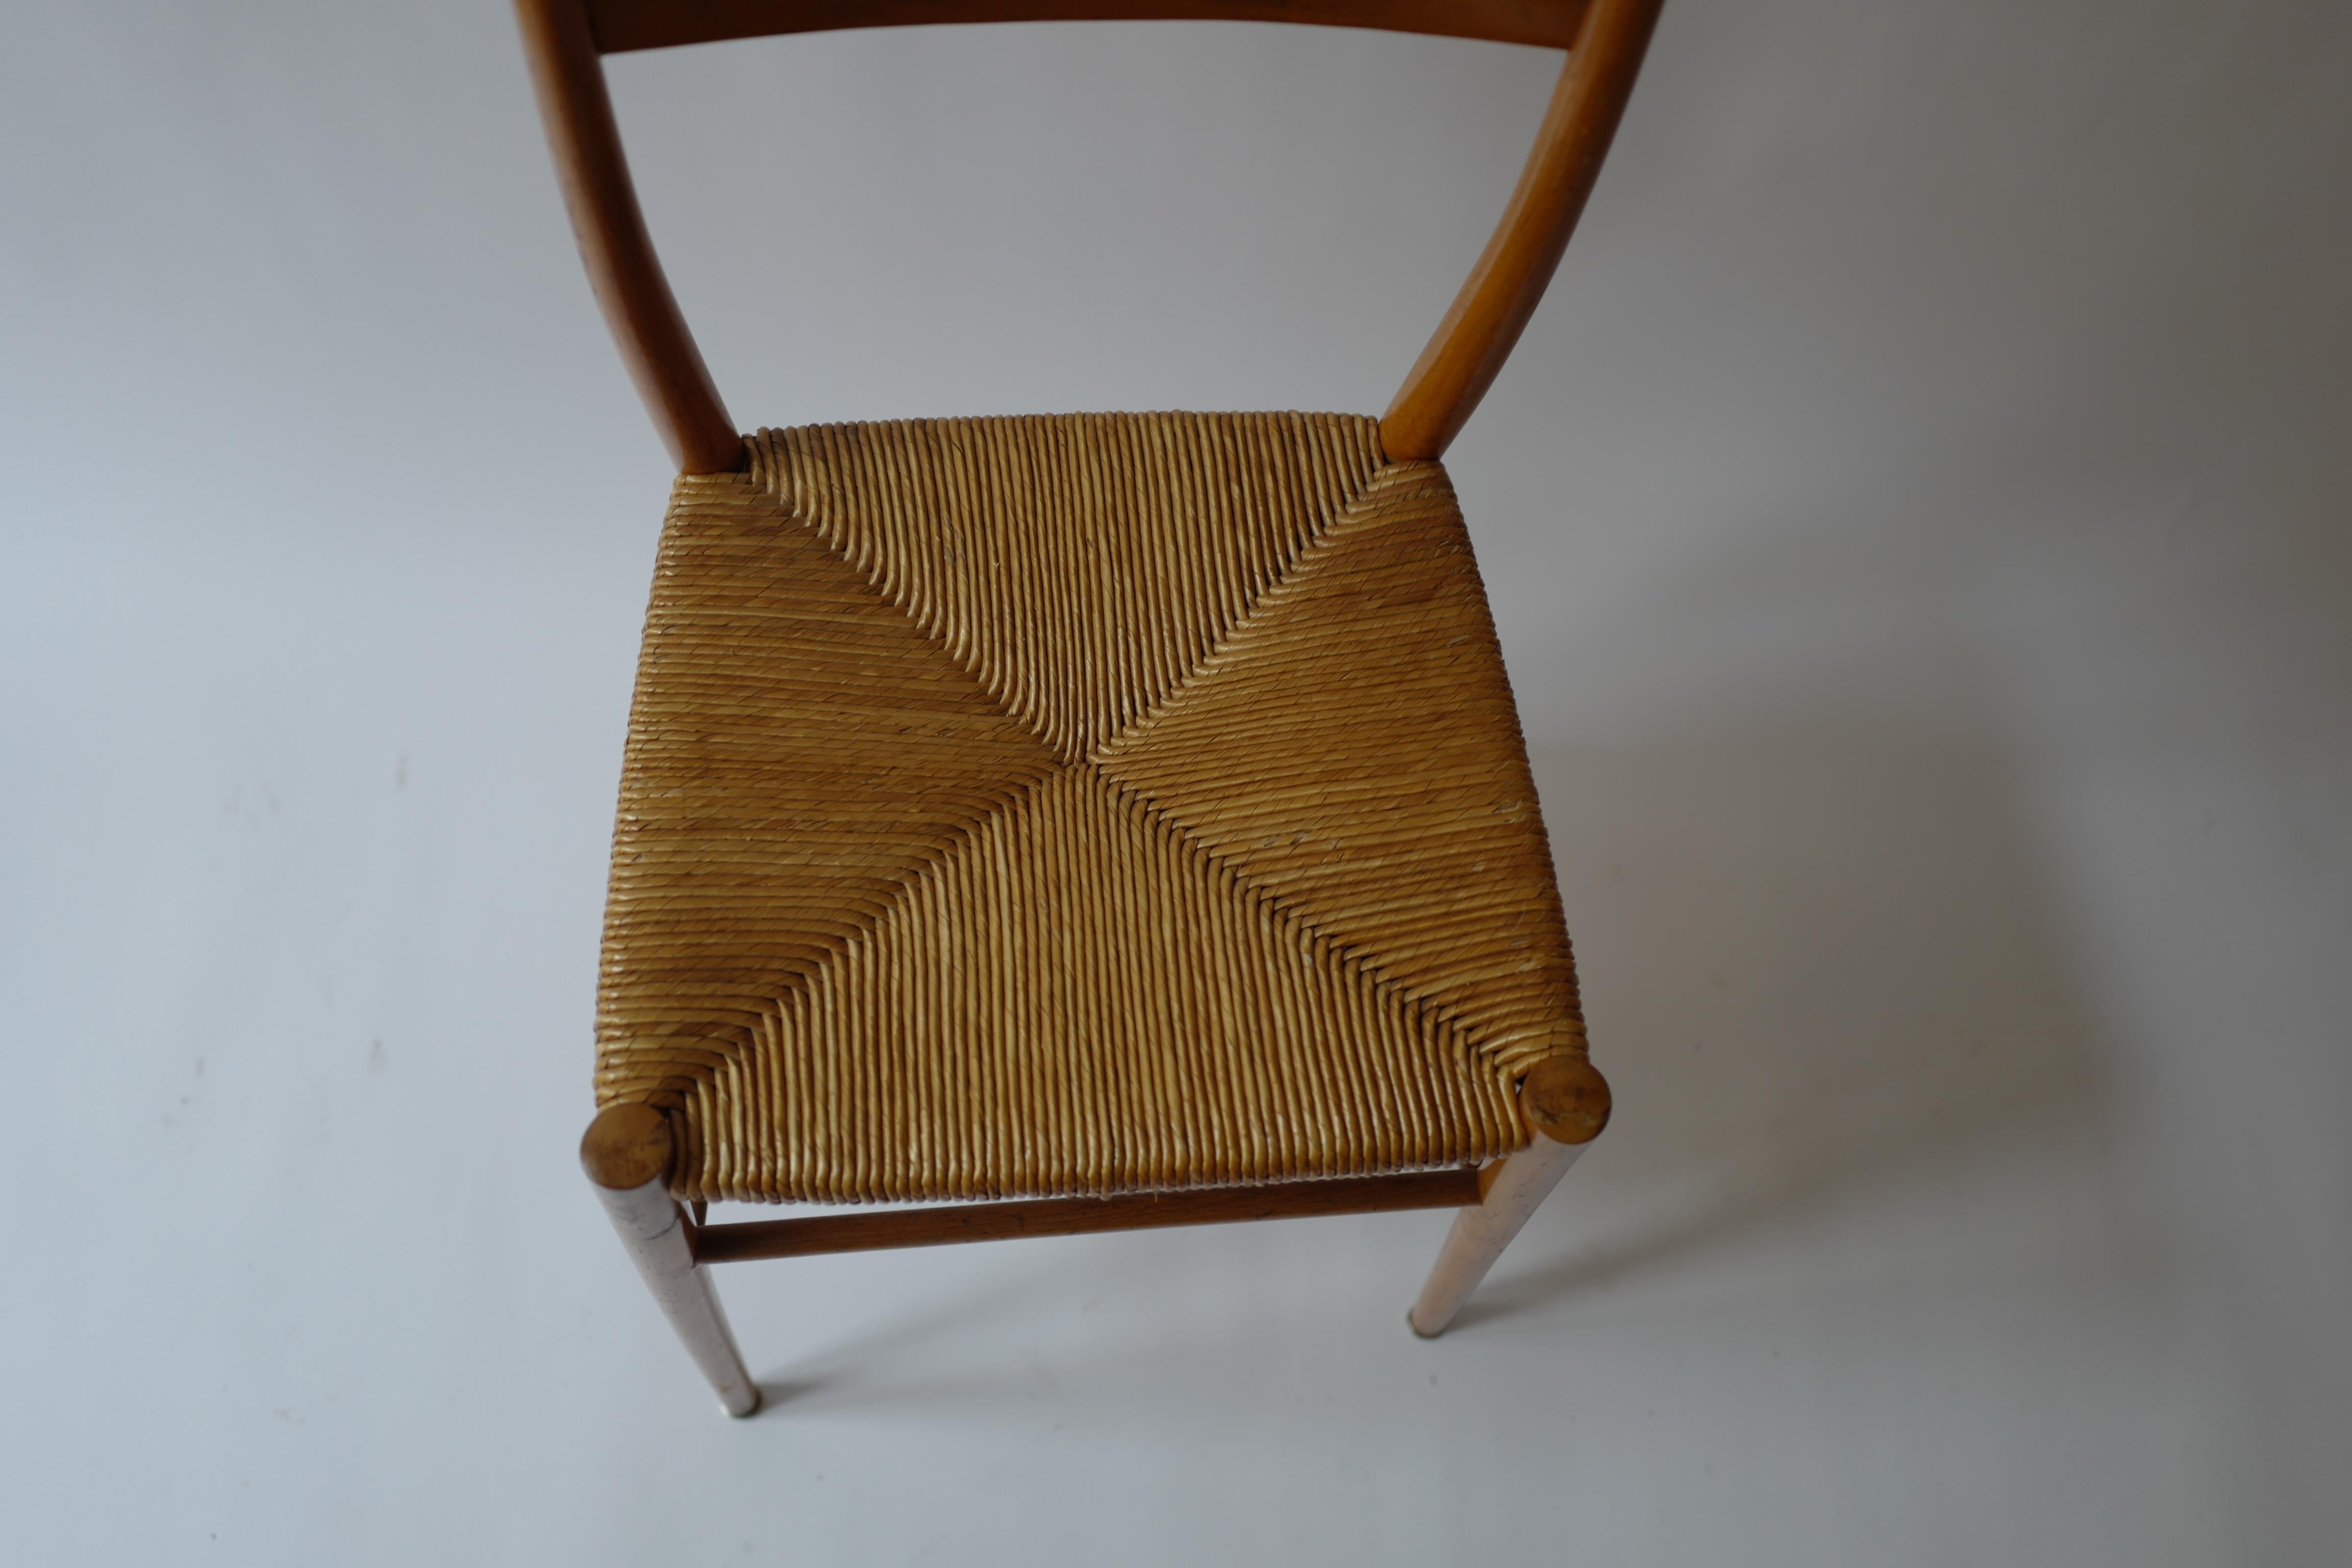 French Woven Wicker and Wood Gio Ponti Style Chair 1950's For Sale